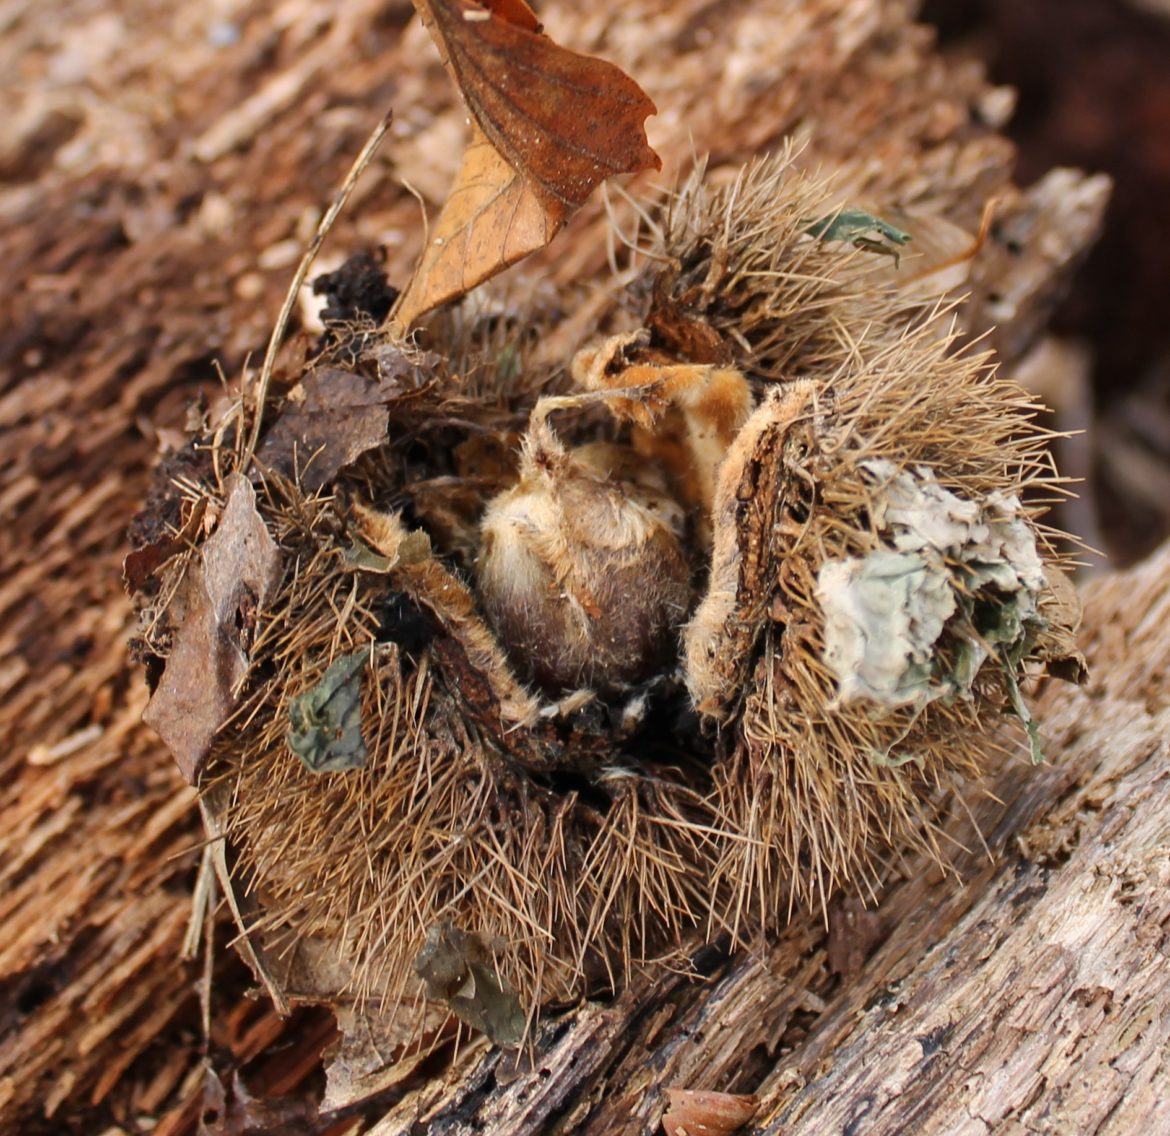 Chestnut within a seed burr